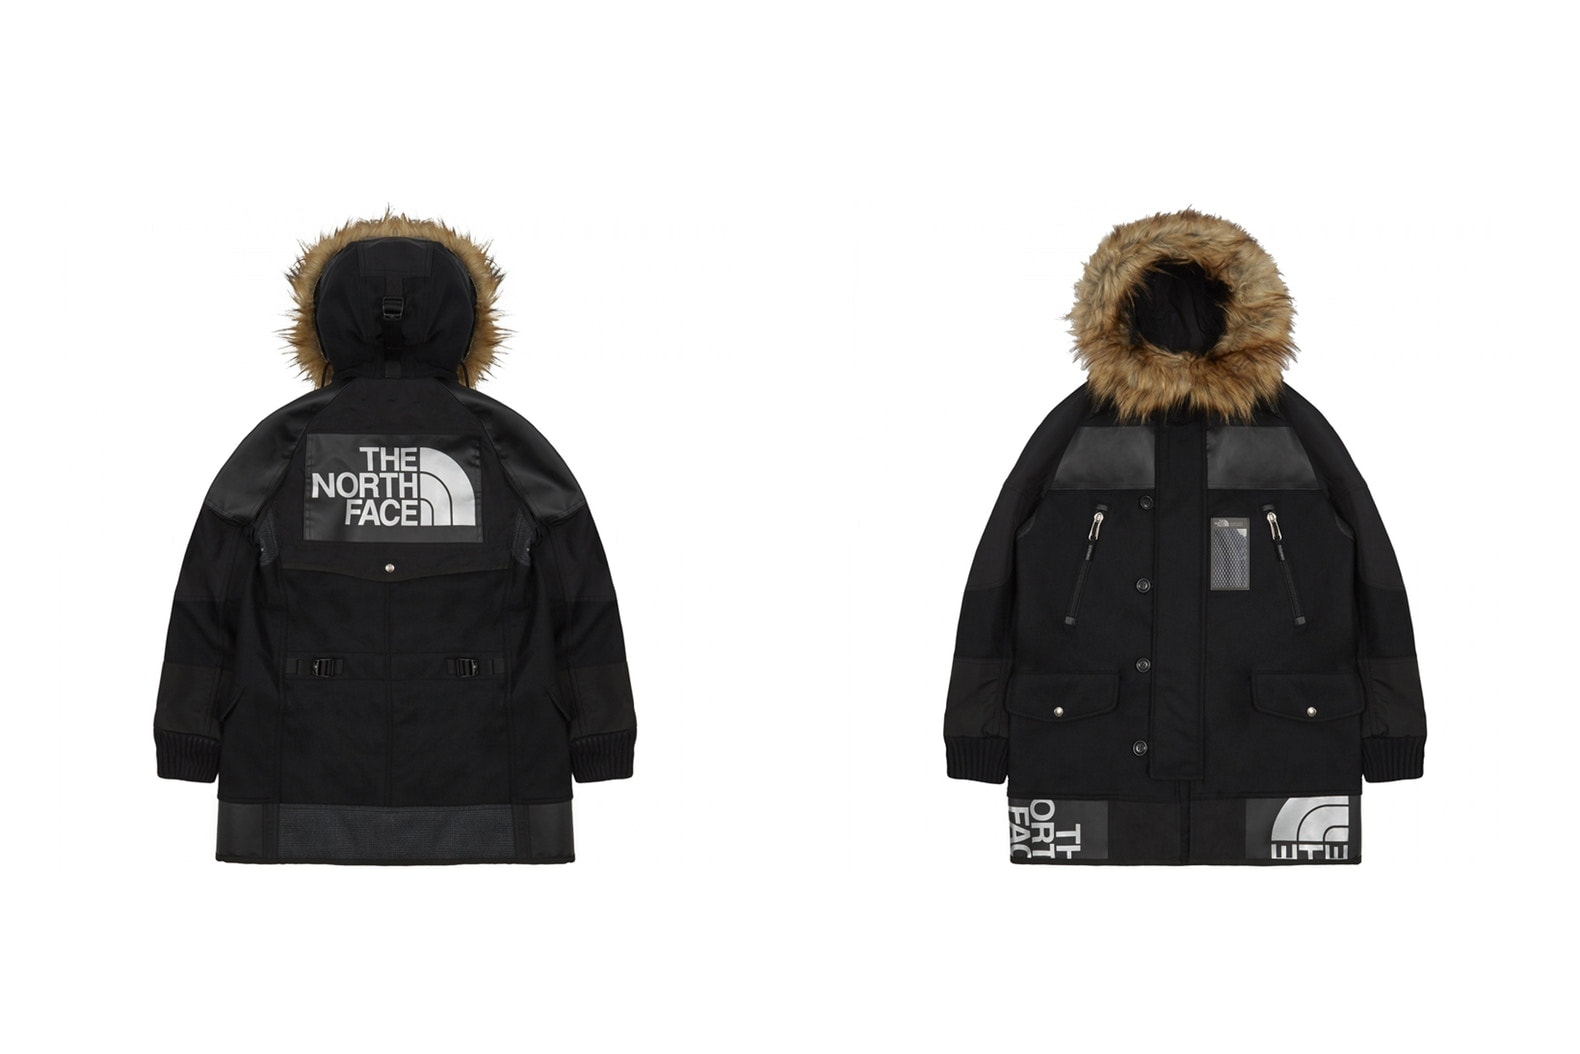 Junya Watanabe MAN x The North Face 2017 Fall/Winter Outerwear Collection DSML